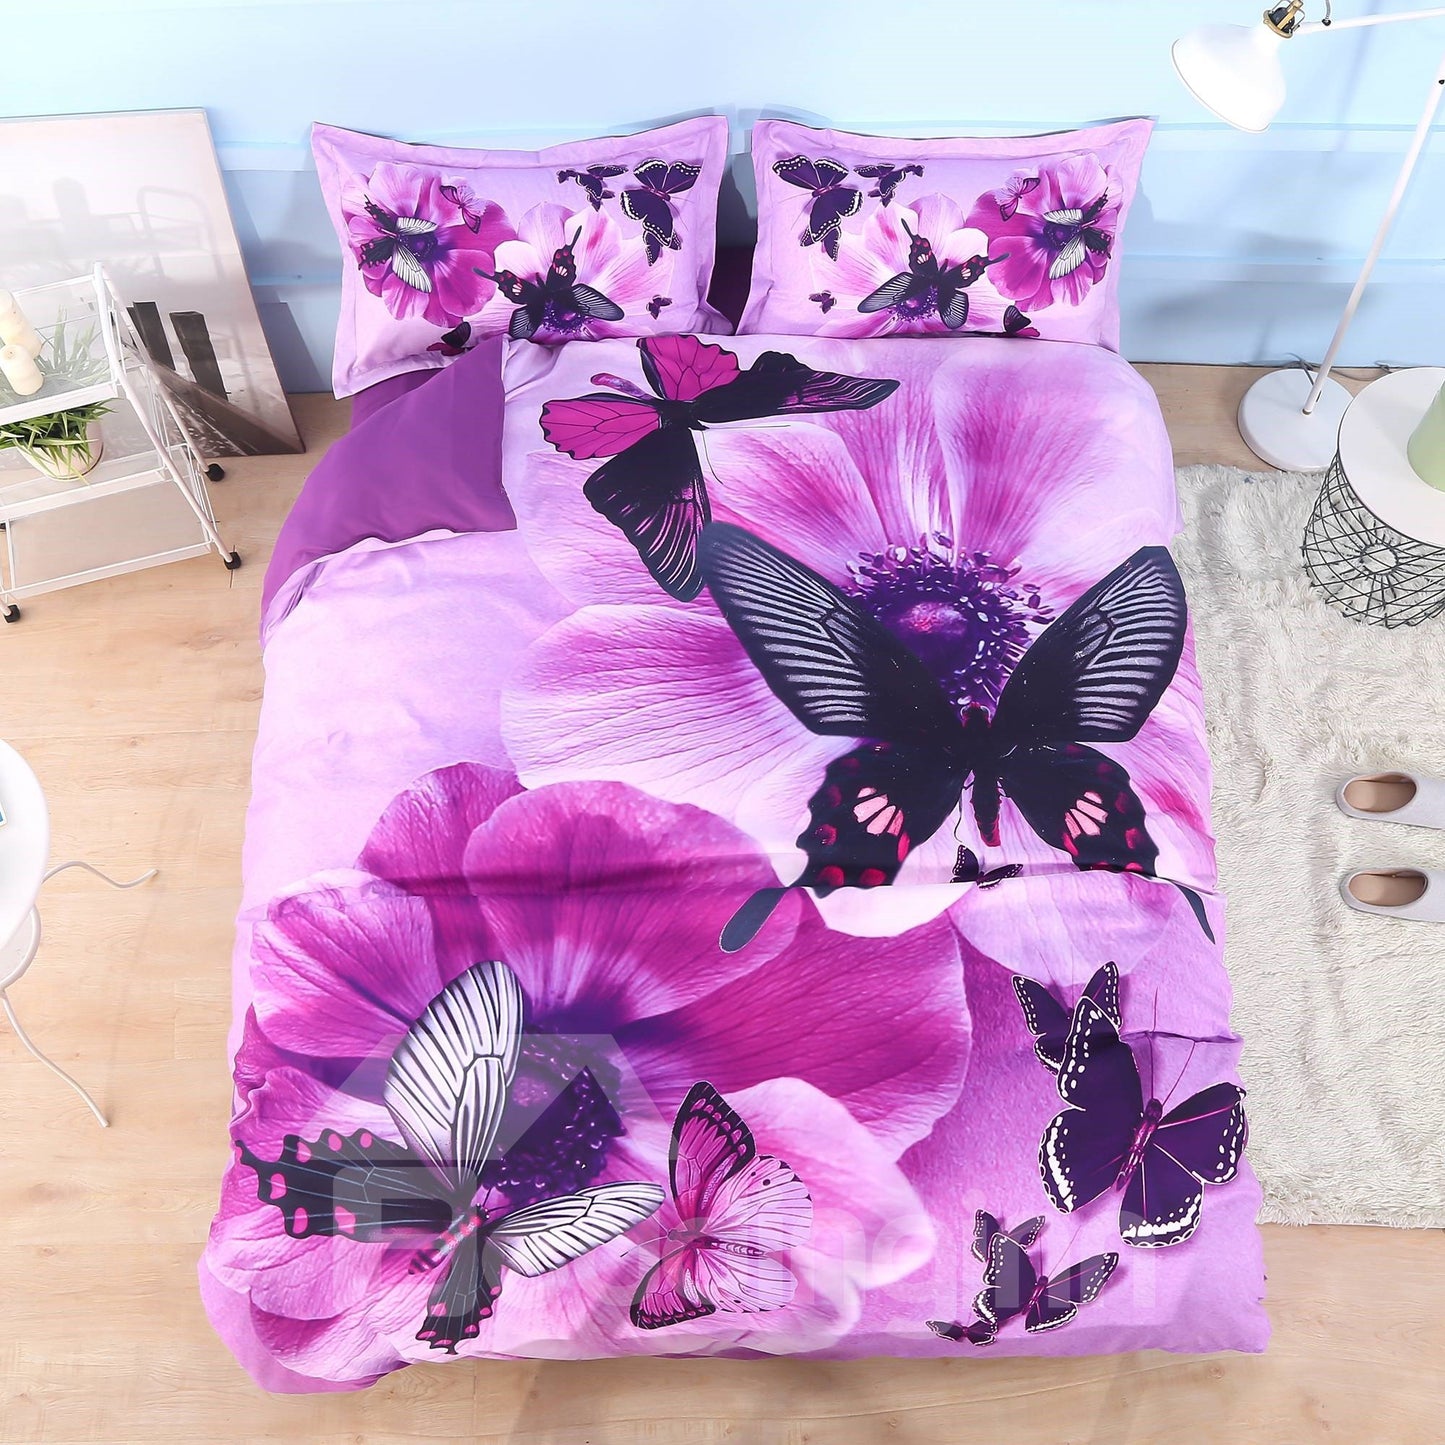 Pansy and Butterfly Printed 4-Piece 3D Floral Bedding Set/Duvet Cover Set Purple Microfiber (King)